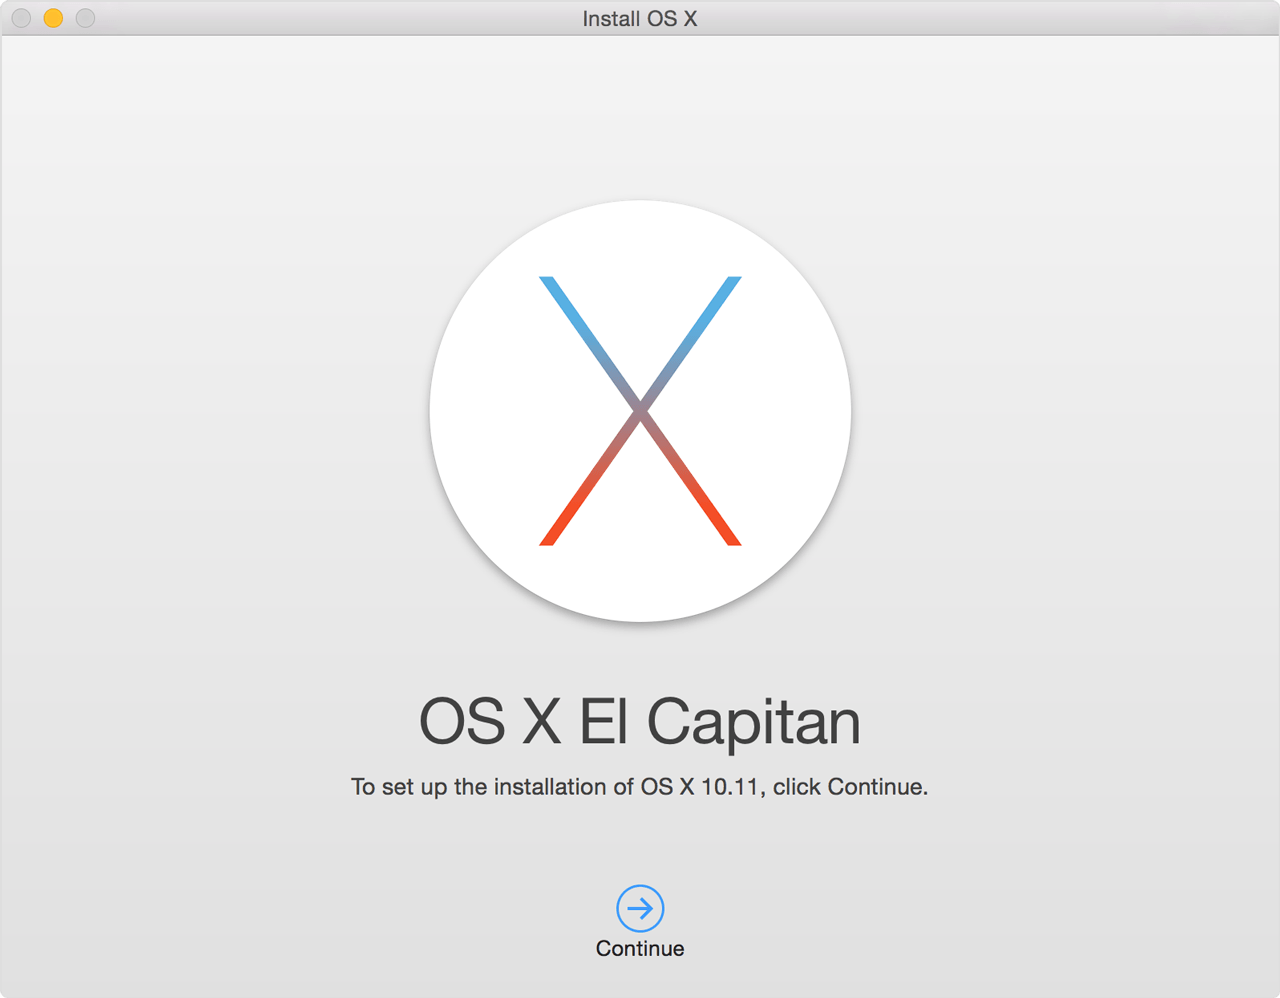 OS X Logo - How to upgrade to OS X El Capitan - Apple Support